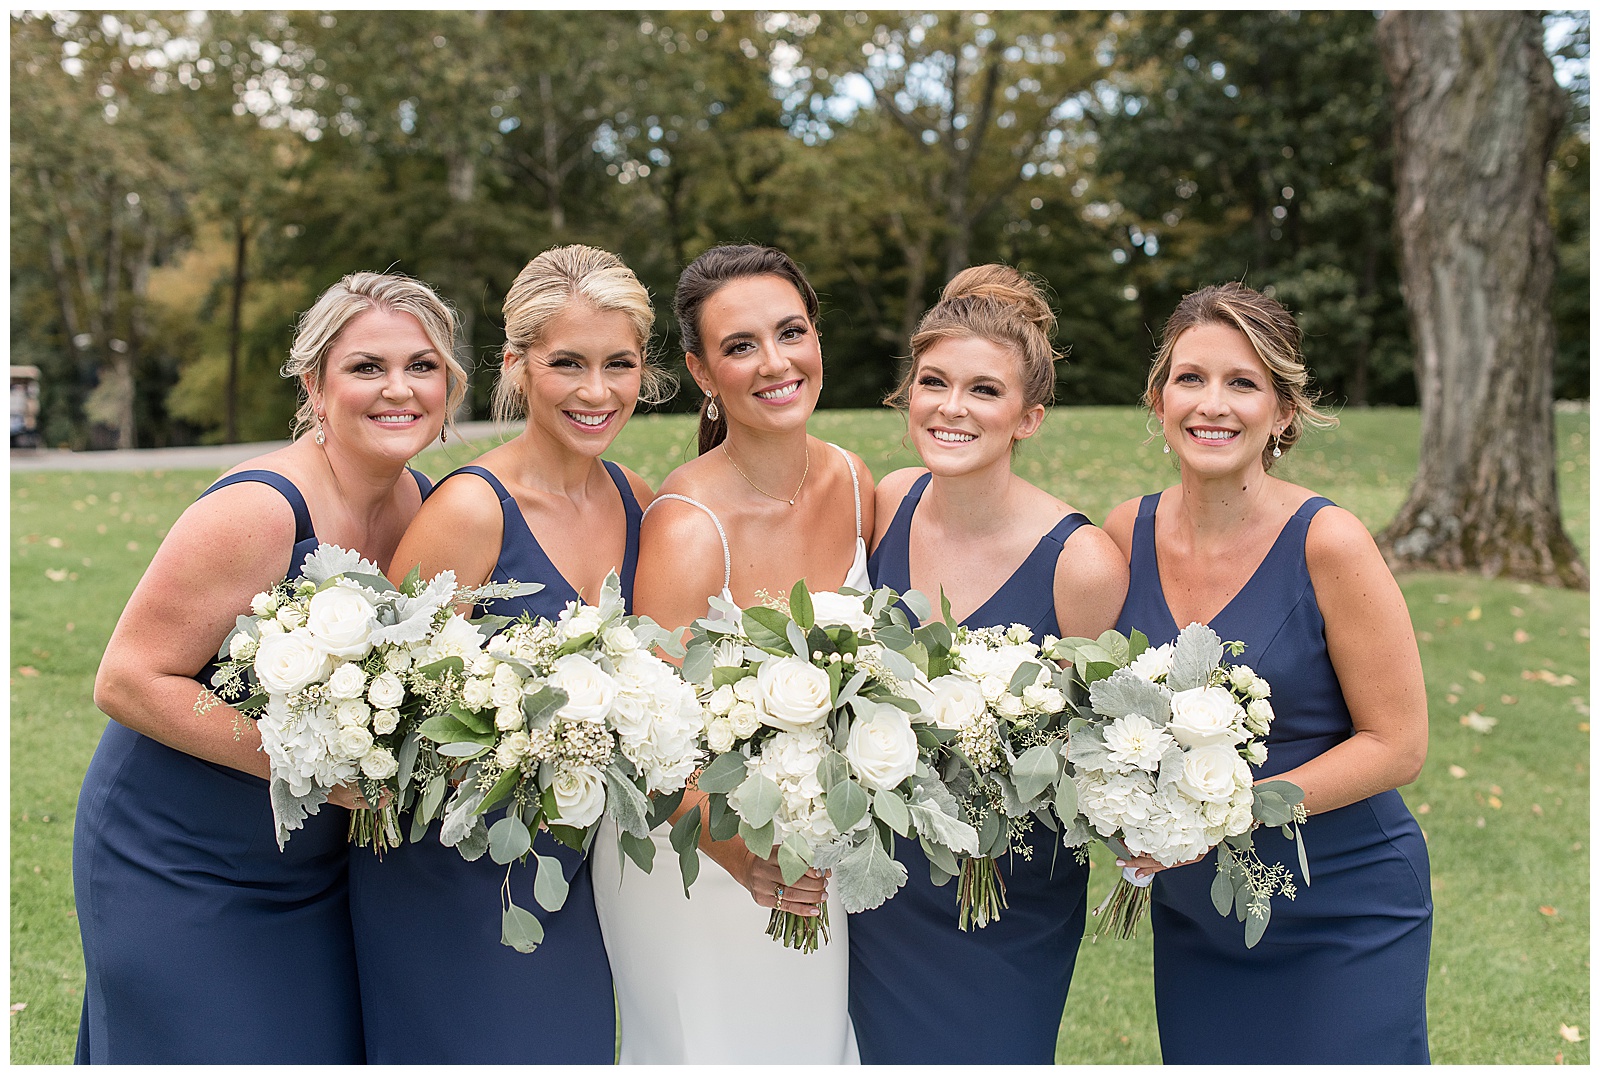 bride in white sleeveless gown surrounded by bridesmaids in dark teal sleeveless gowns all leaning in holding white bouquets